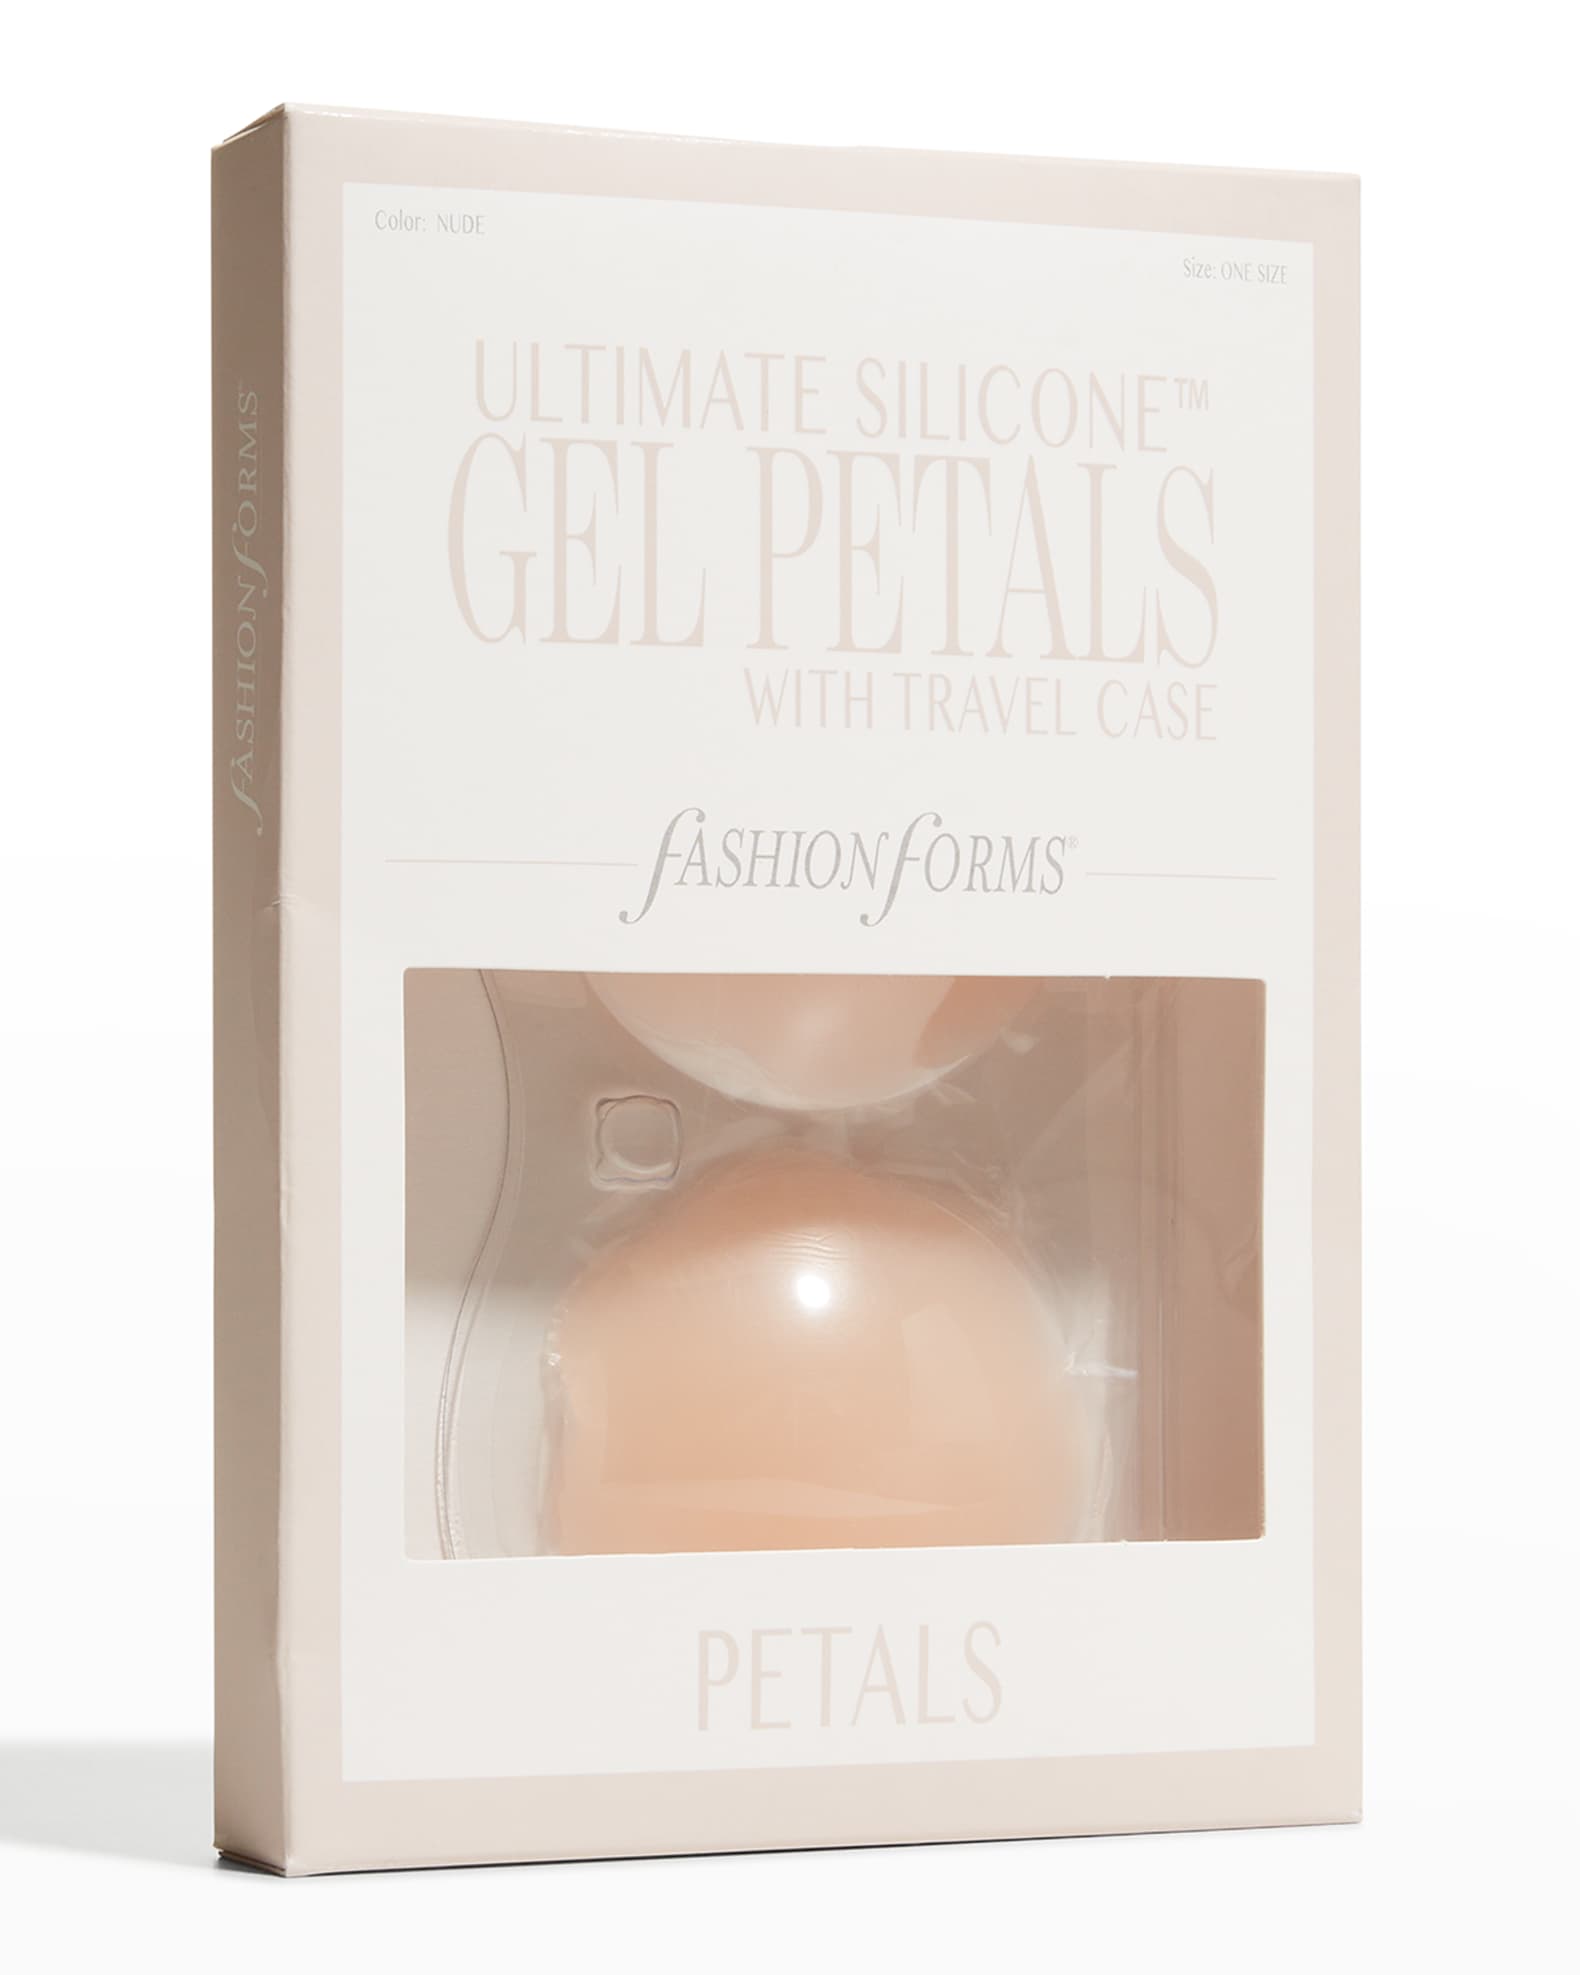 Fashion Forms Women's Ultimate Silicone Gel Petals, Nude, Tan, One Size at   Women's Clothing store: Breast Petals